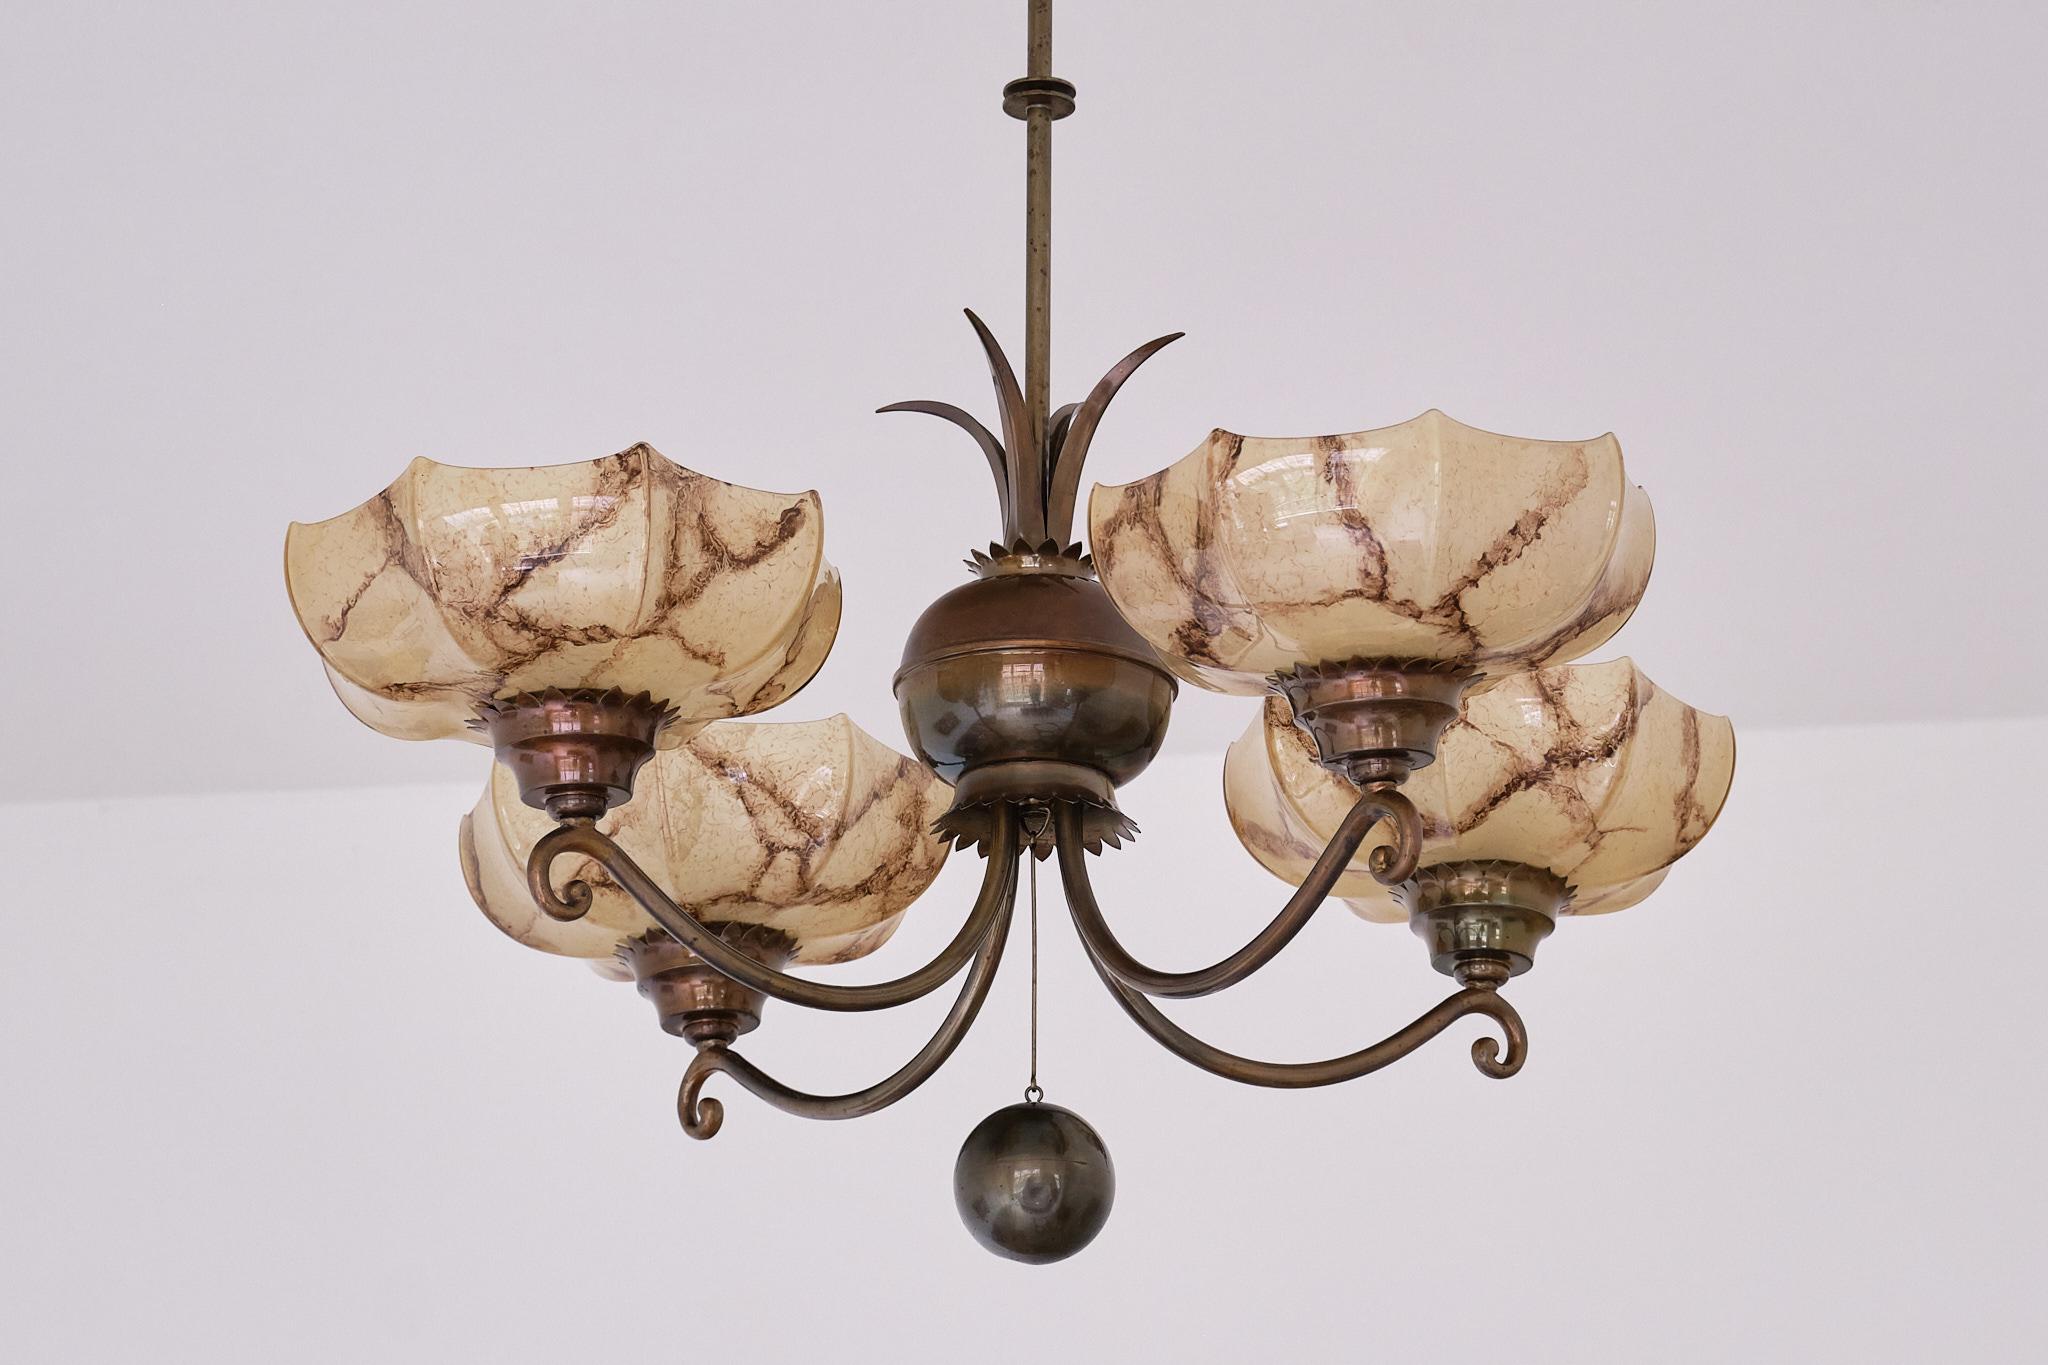 This striking four arm chandelier was designed by Harald Notini and produced by Arvid Böhlmarks Lampfabrik in Sweden, circa 1927.  This particular model numbered 6316 is a great example of the unique Swedish Grace style of this period.

The striking